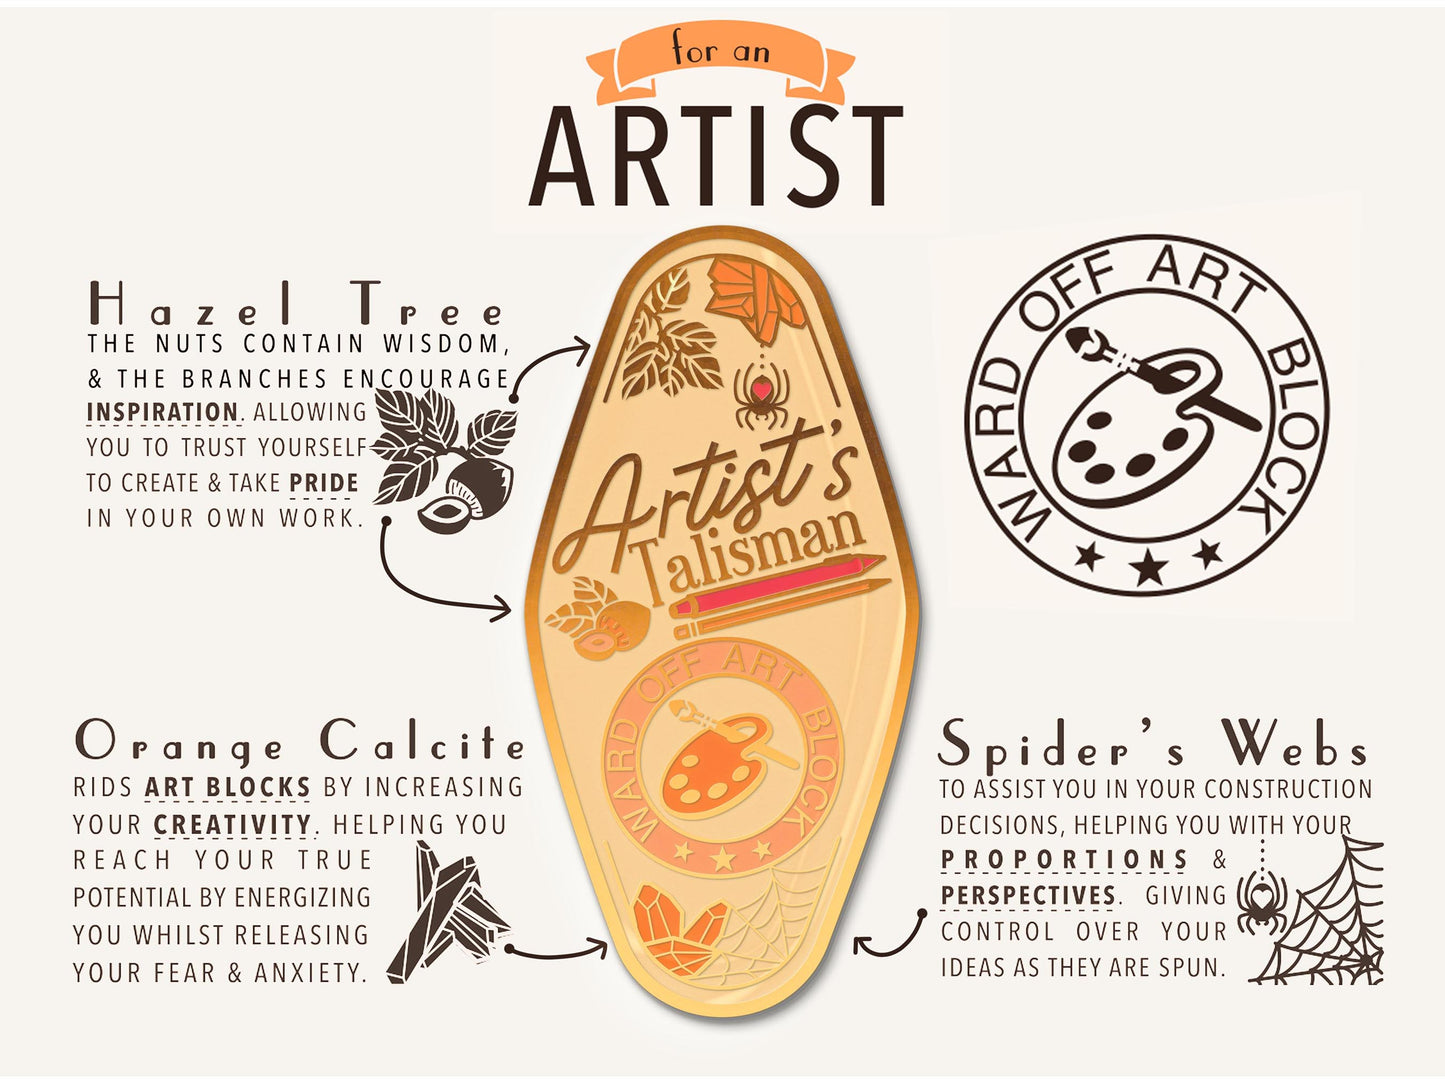 A illustrated diagram outline the symbolism of the different design elements of the for a Artist's Talisman pin. Information includes the meaning of the hazel tree, orange calcite, and the spider's webs.